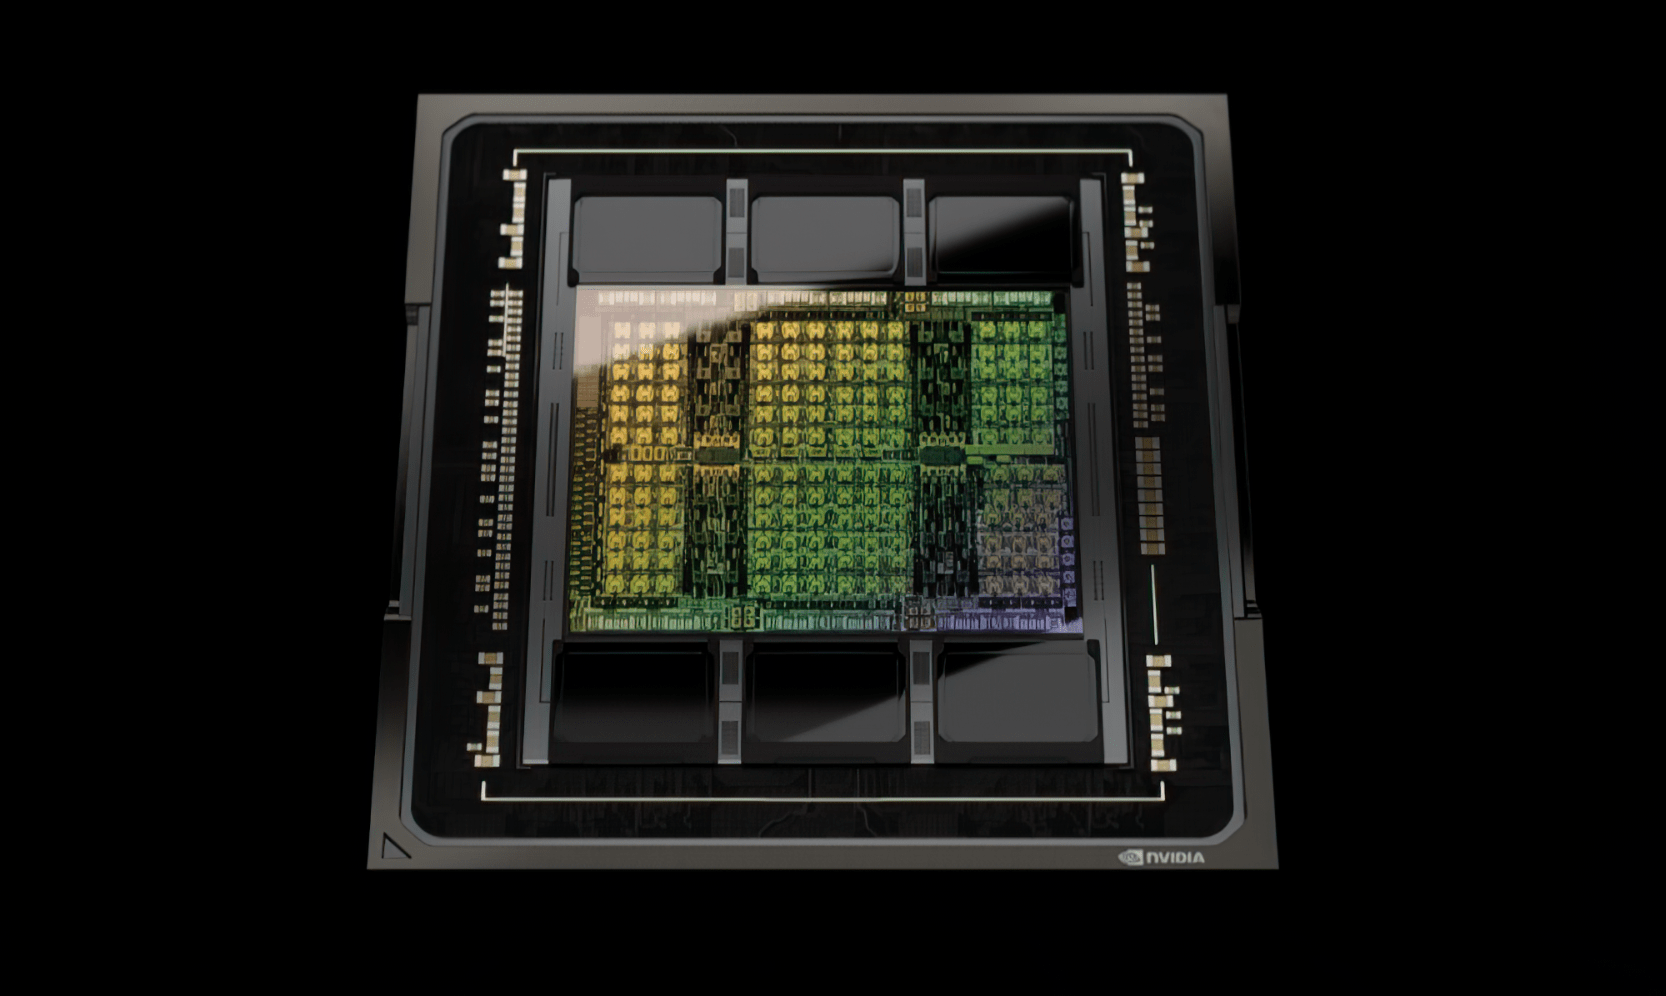 NVIDIA Kepler GK110 GPU Is Equivalent To A Single GPC on Hopper H100 GPU, 4th Gen Tensor Cores Up To 2x Faster 1